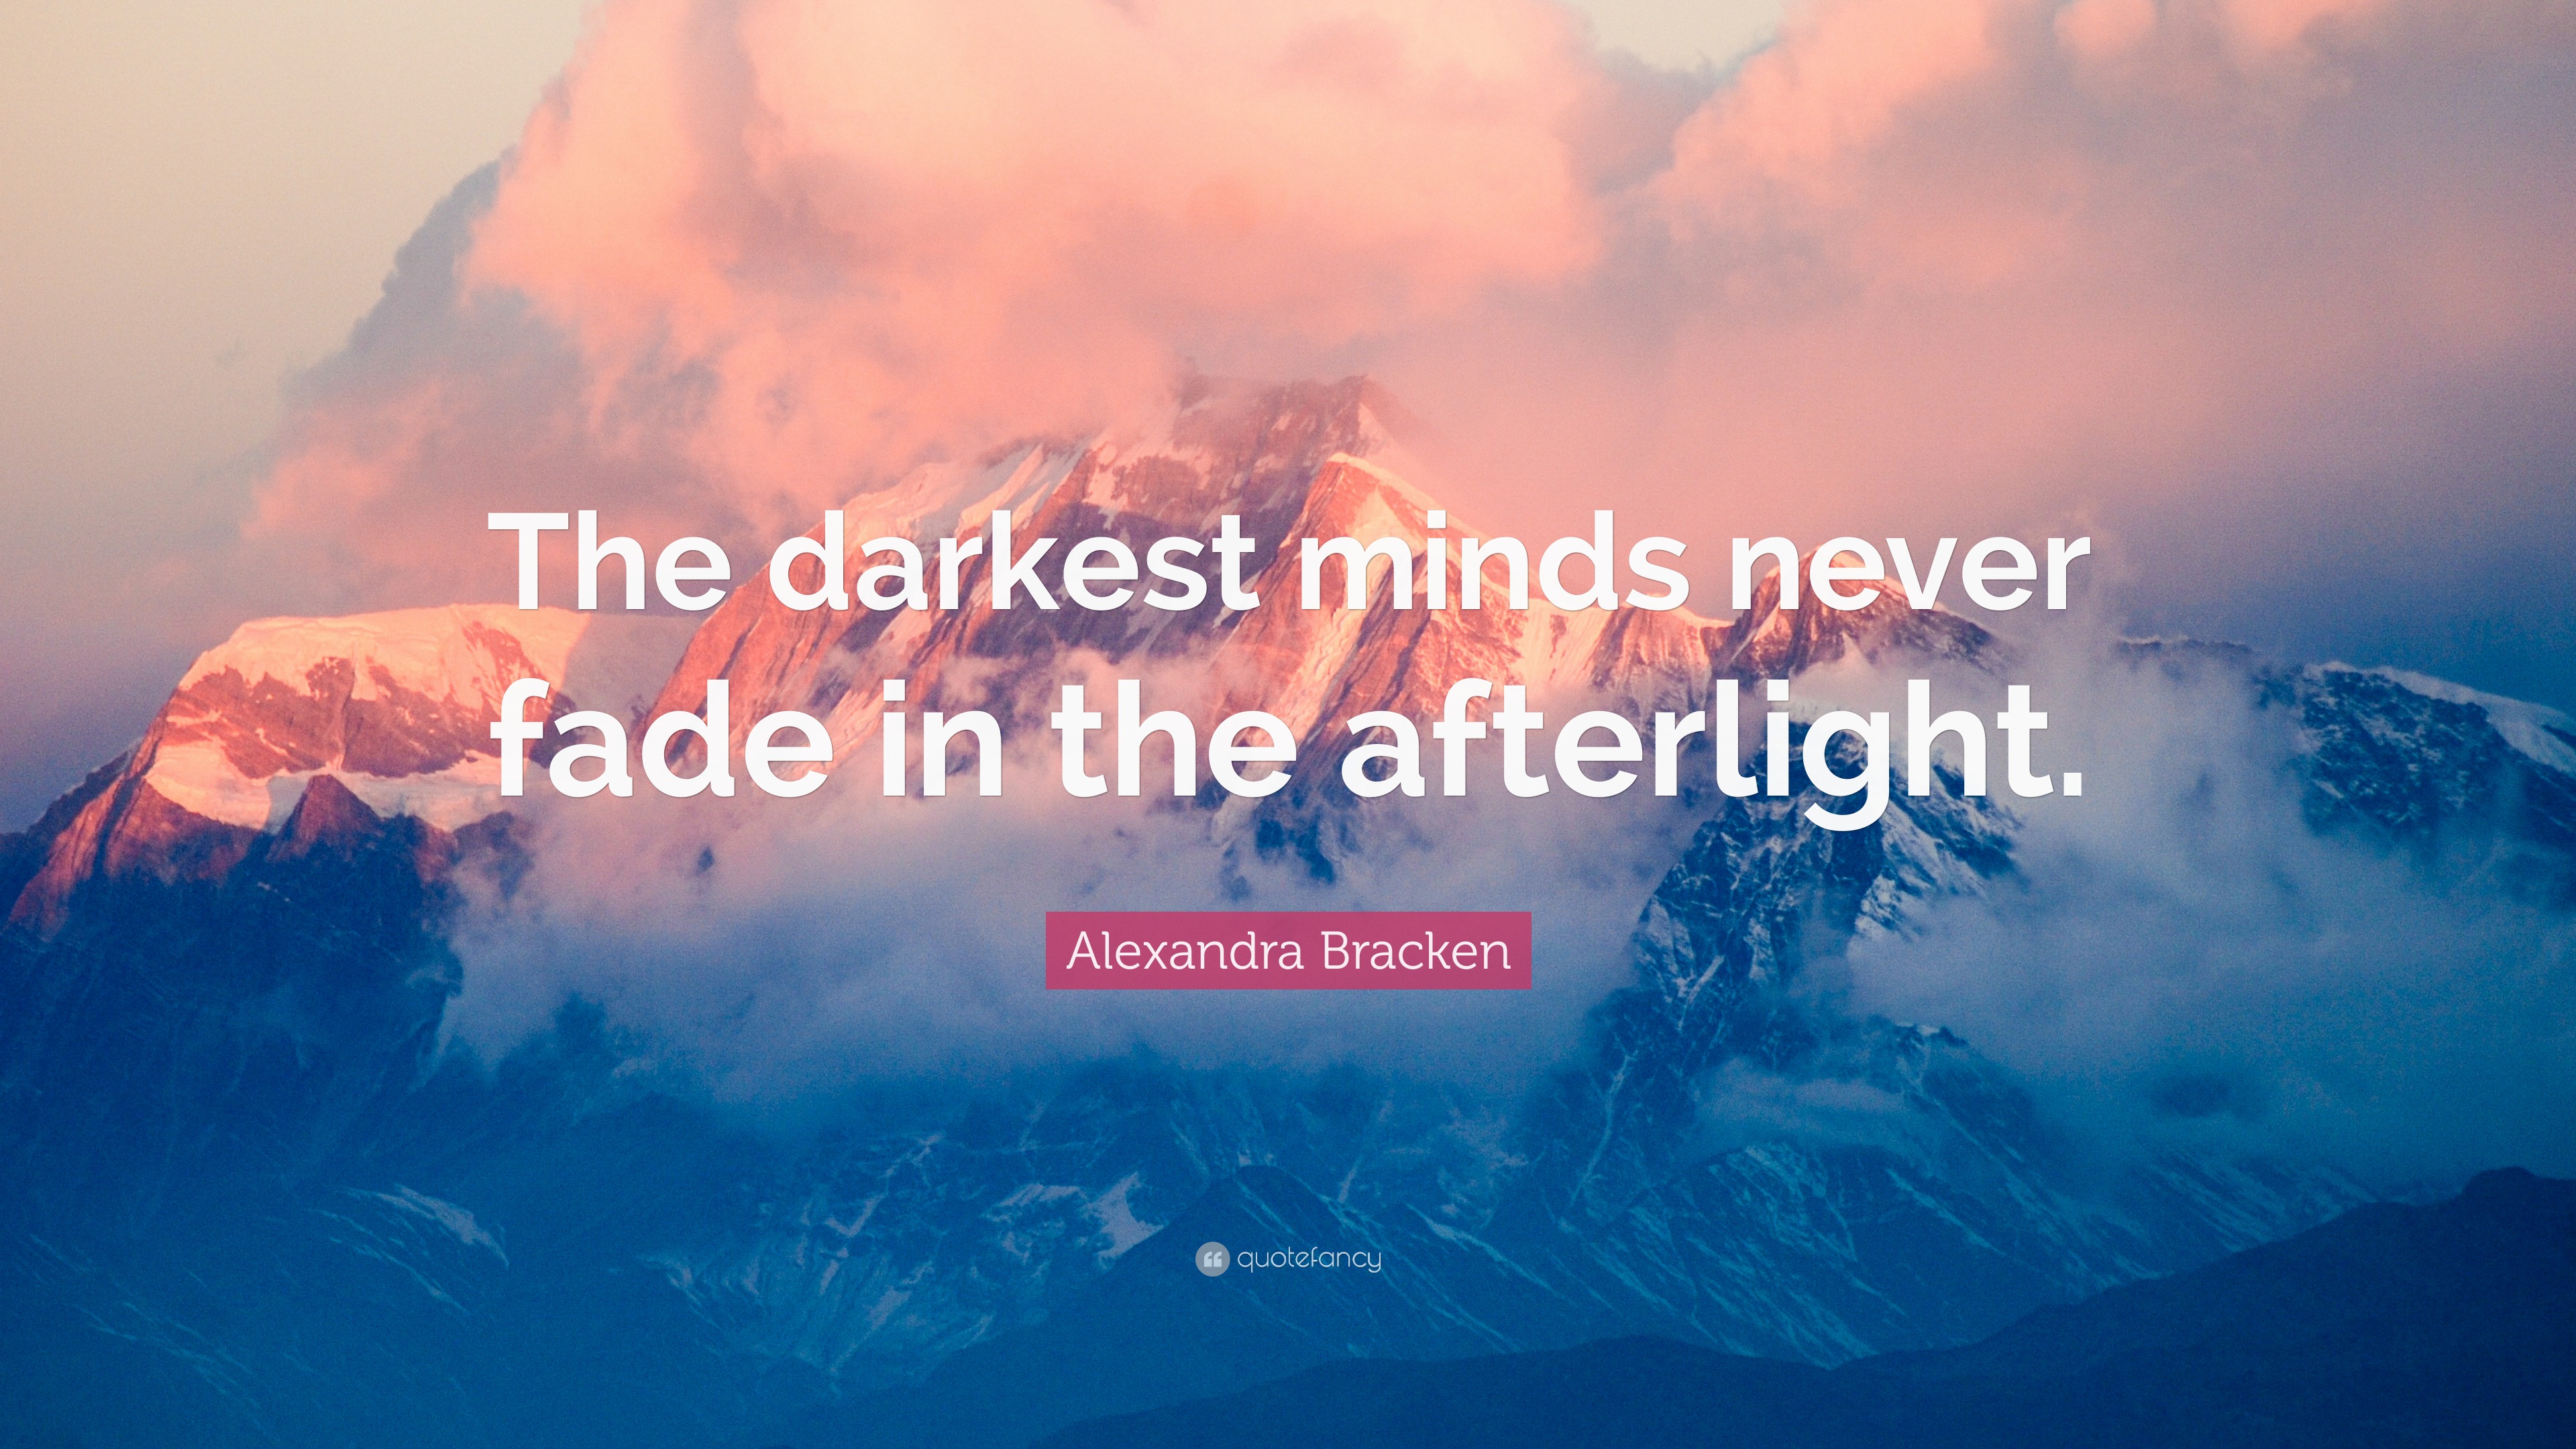 the darkest minds never fade in the afterlight